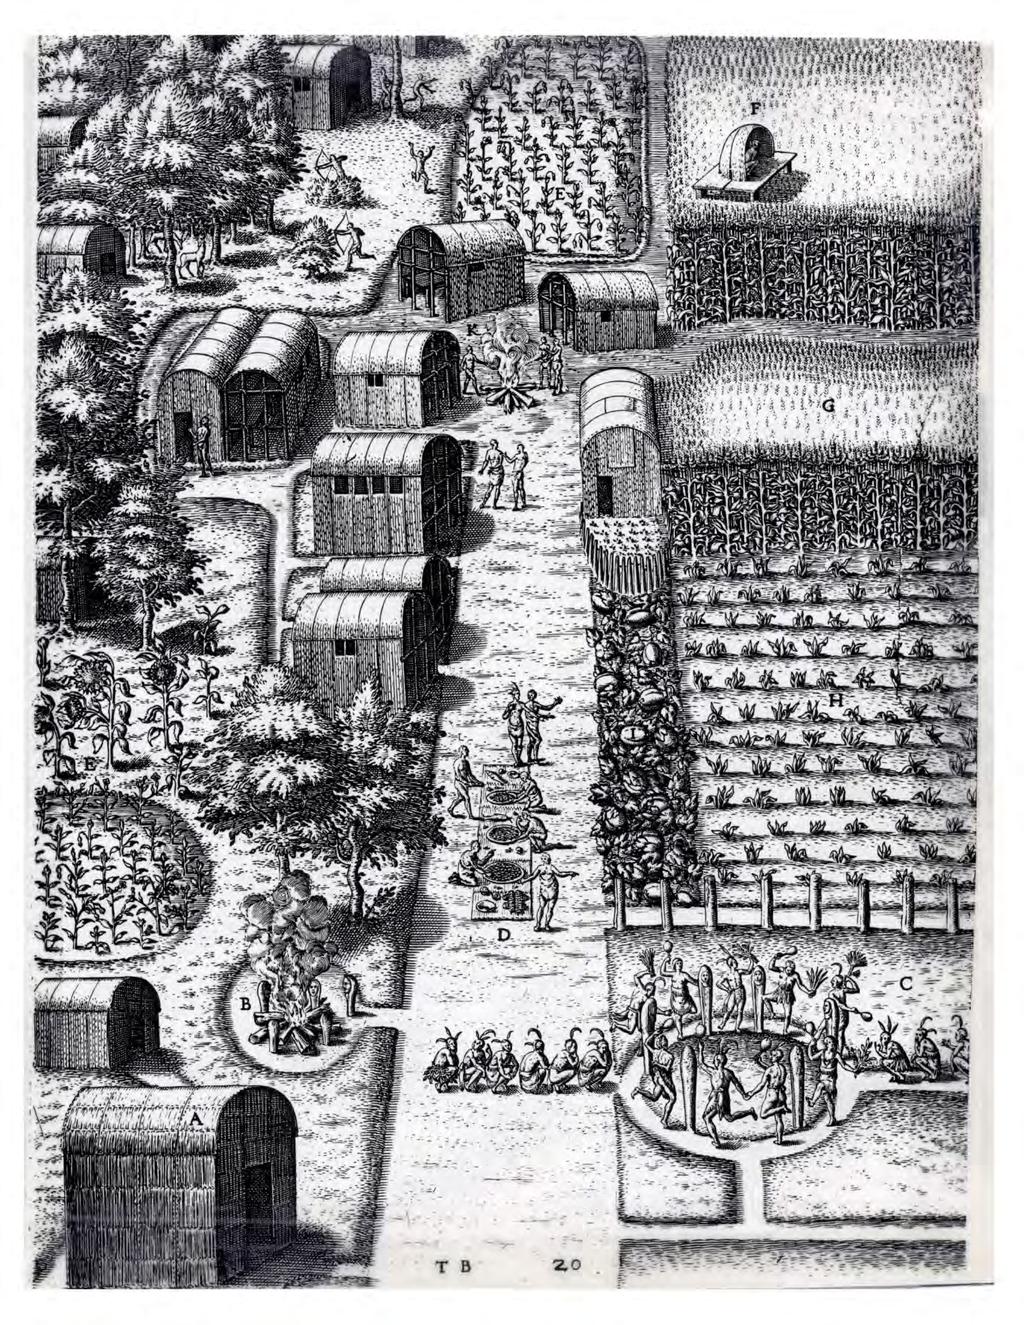 1590 engraving by Theodor debry after the